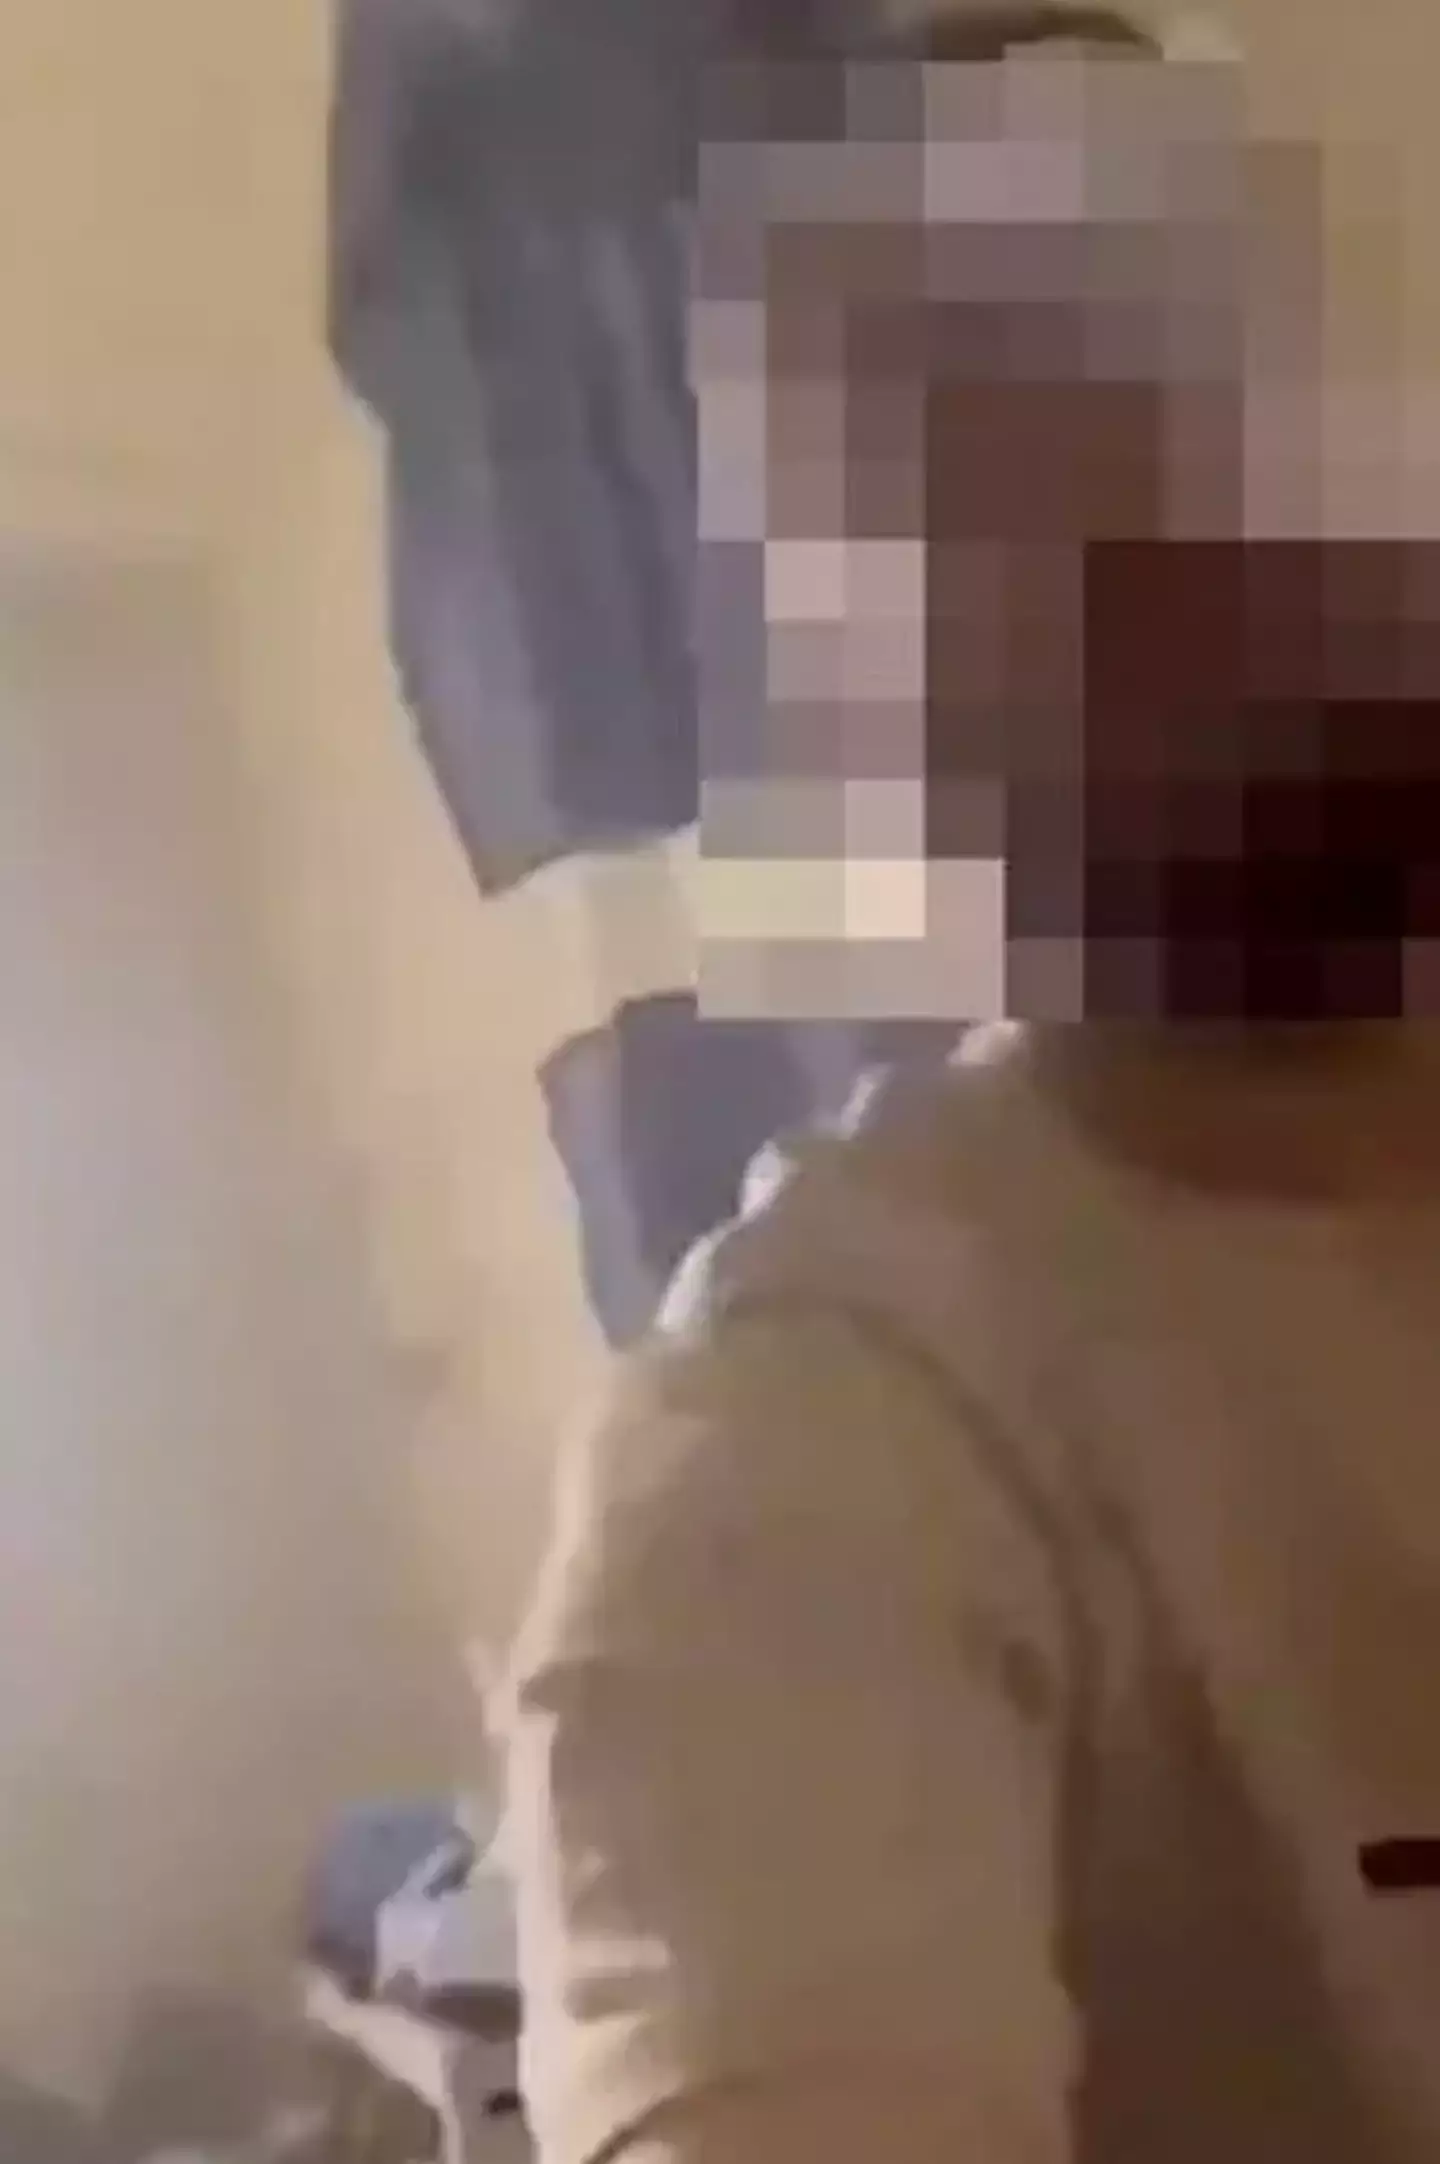 Another inmate filmed the whole thing and called his friend a 'gangster' as the sexual act took place. (X)